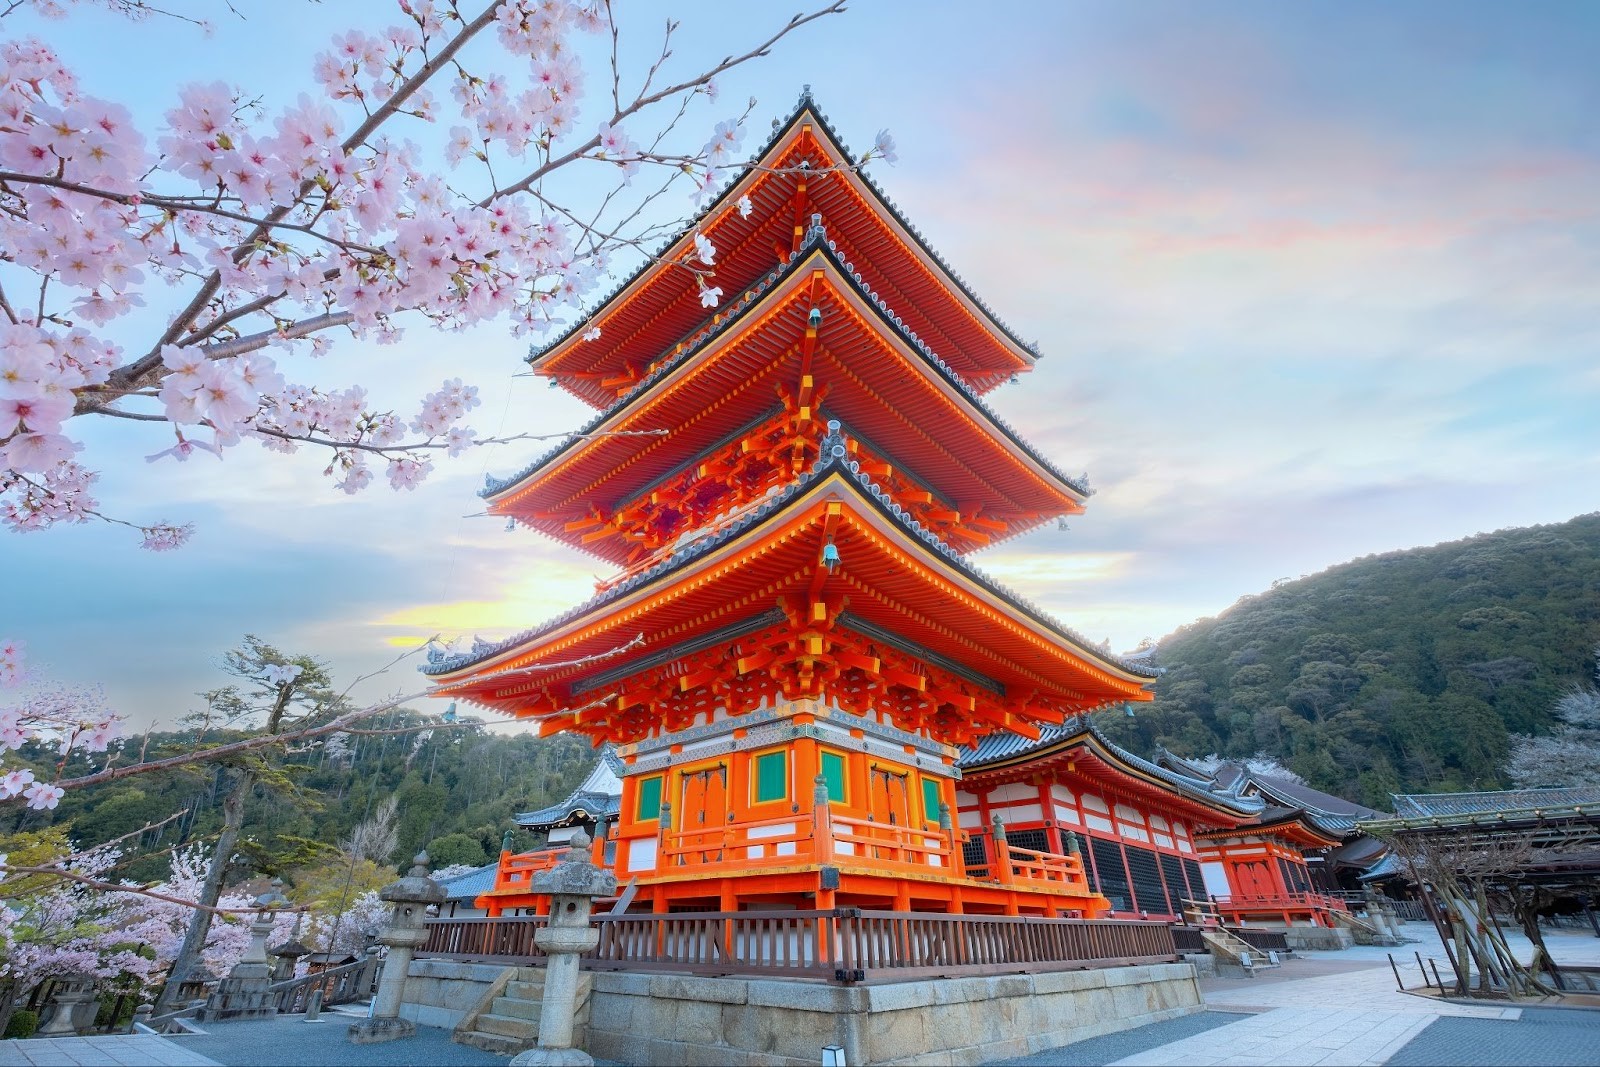 A bright day at the Buddhist temple, Kiyomizu-dera, in eastern Kyoto, Japan, during cherry blossom season.